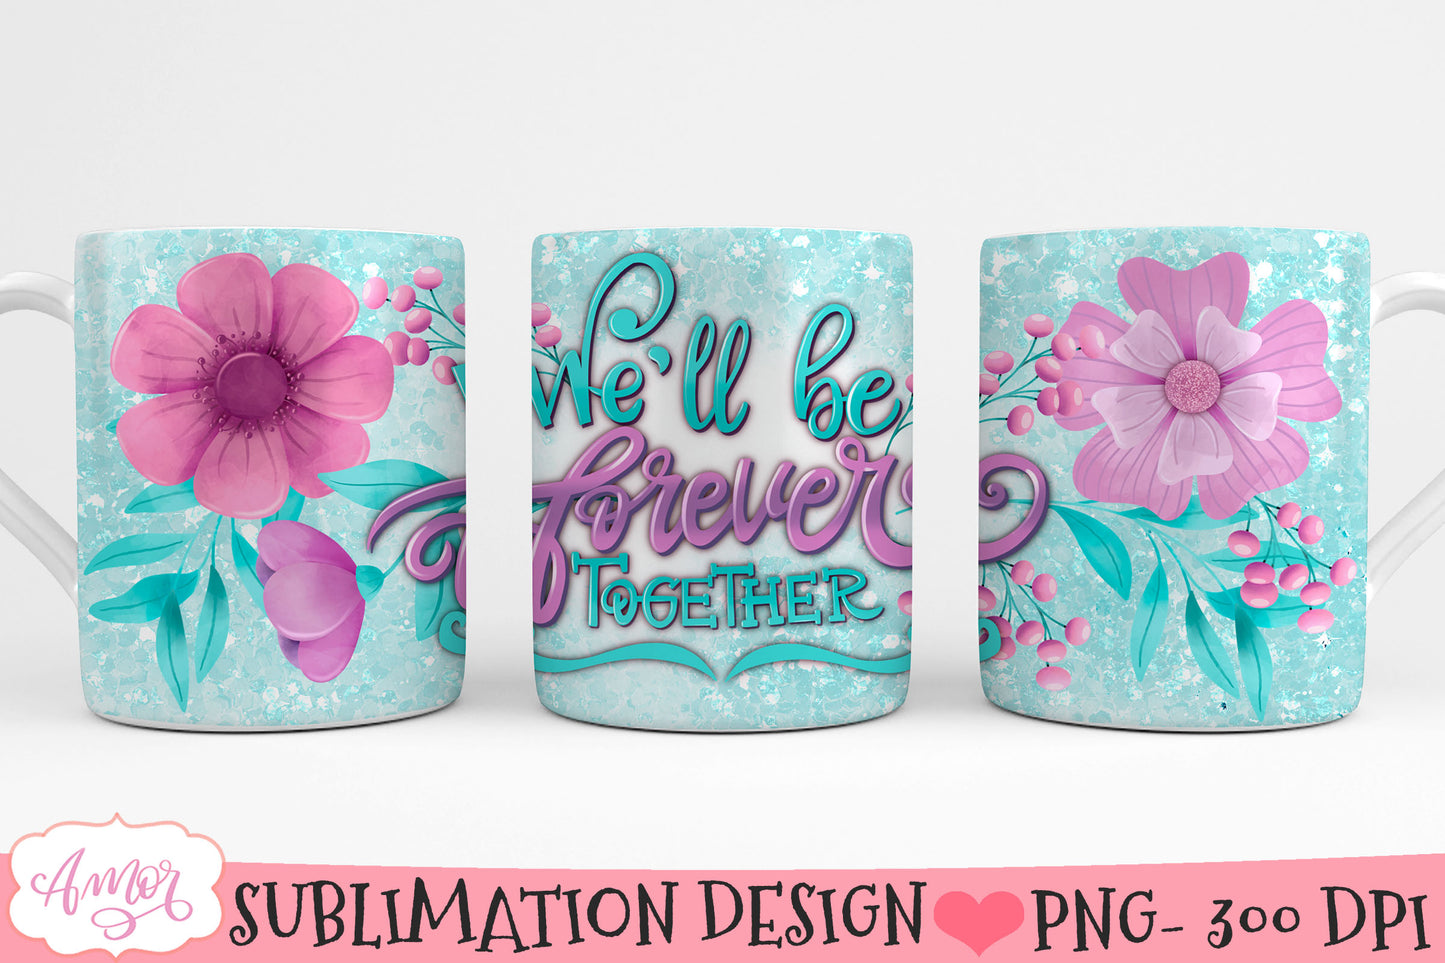 We will be forever together mug wrap PNG for sublimation